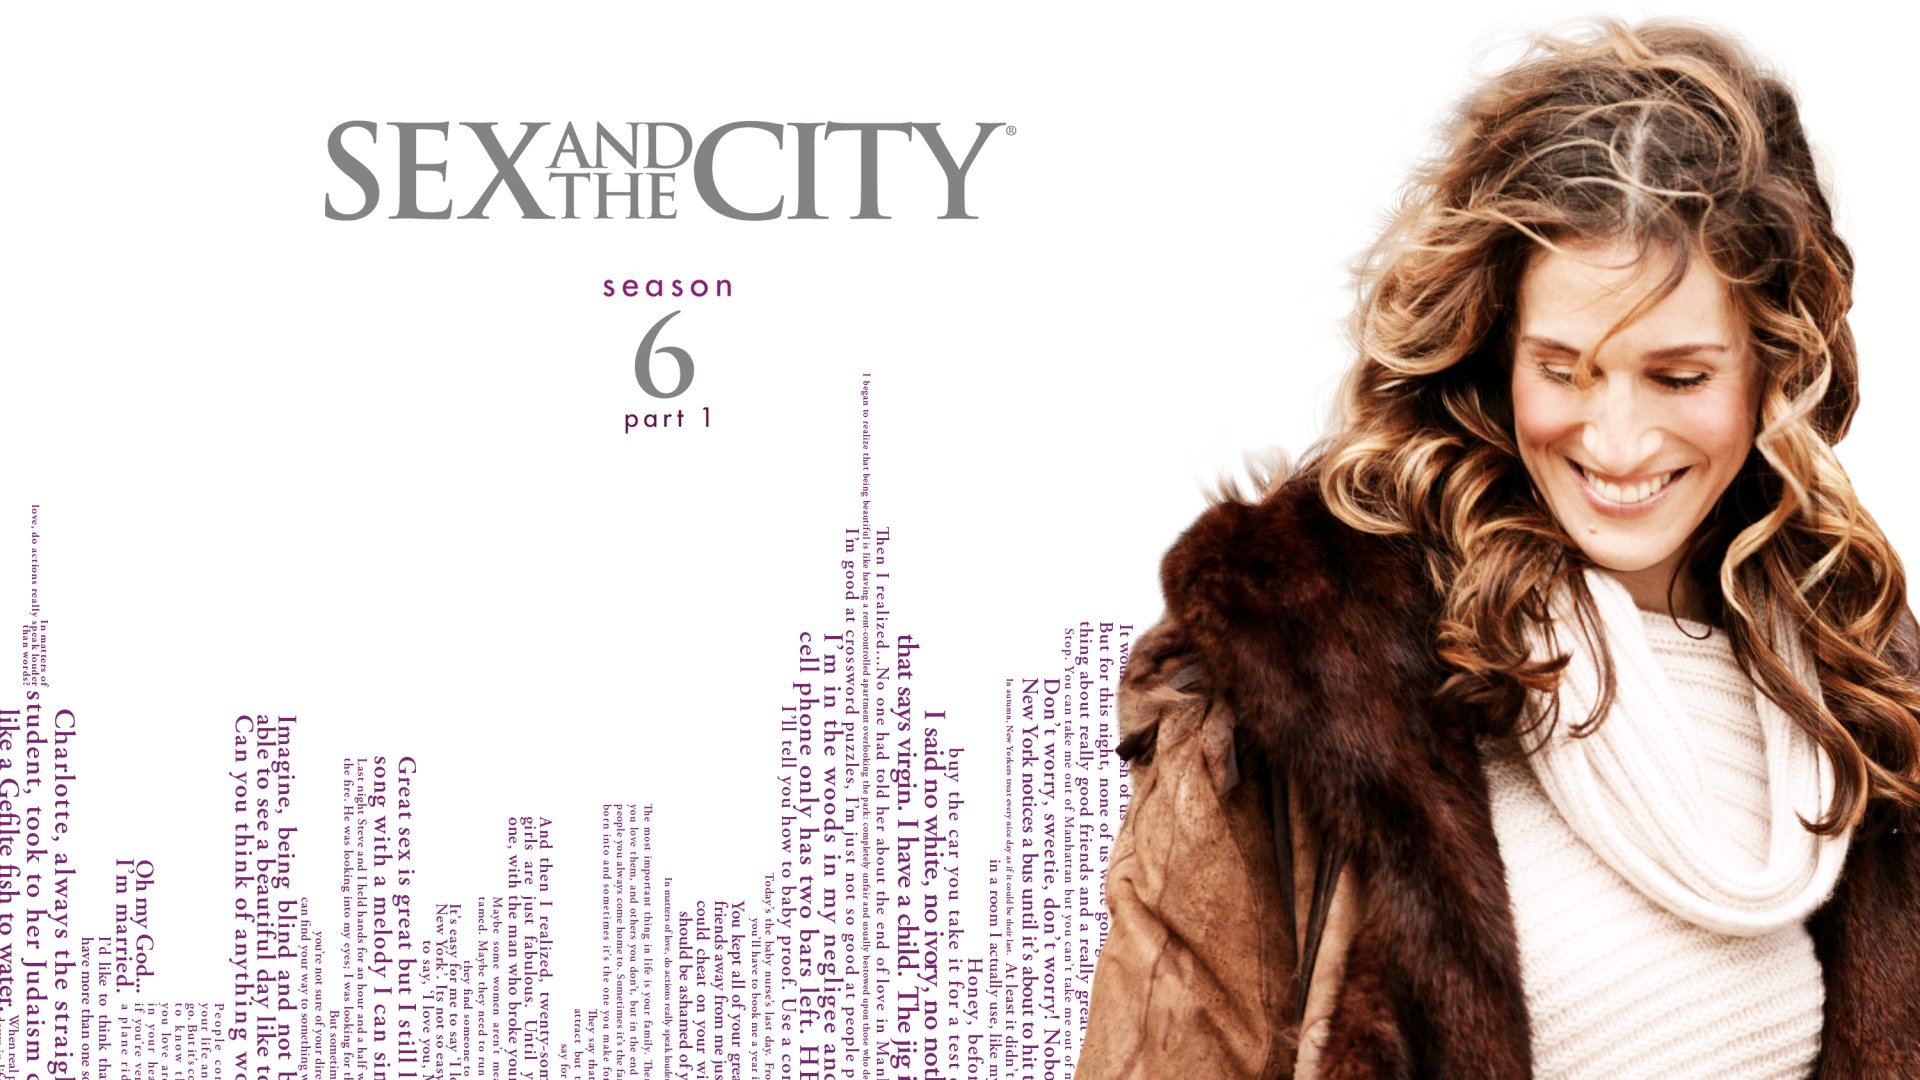 How to watch the Sex and the City movies and TV shows in order